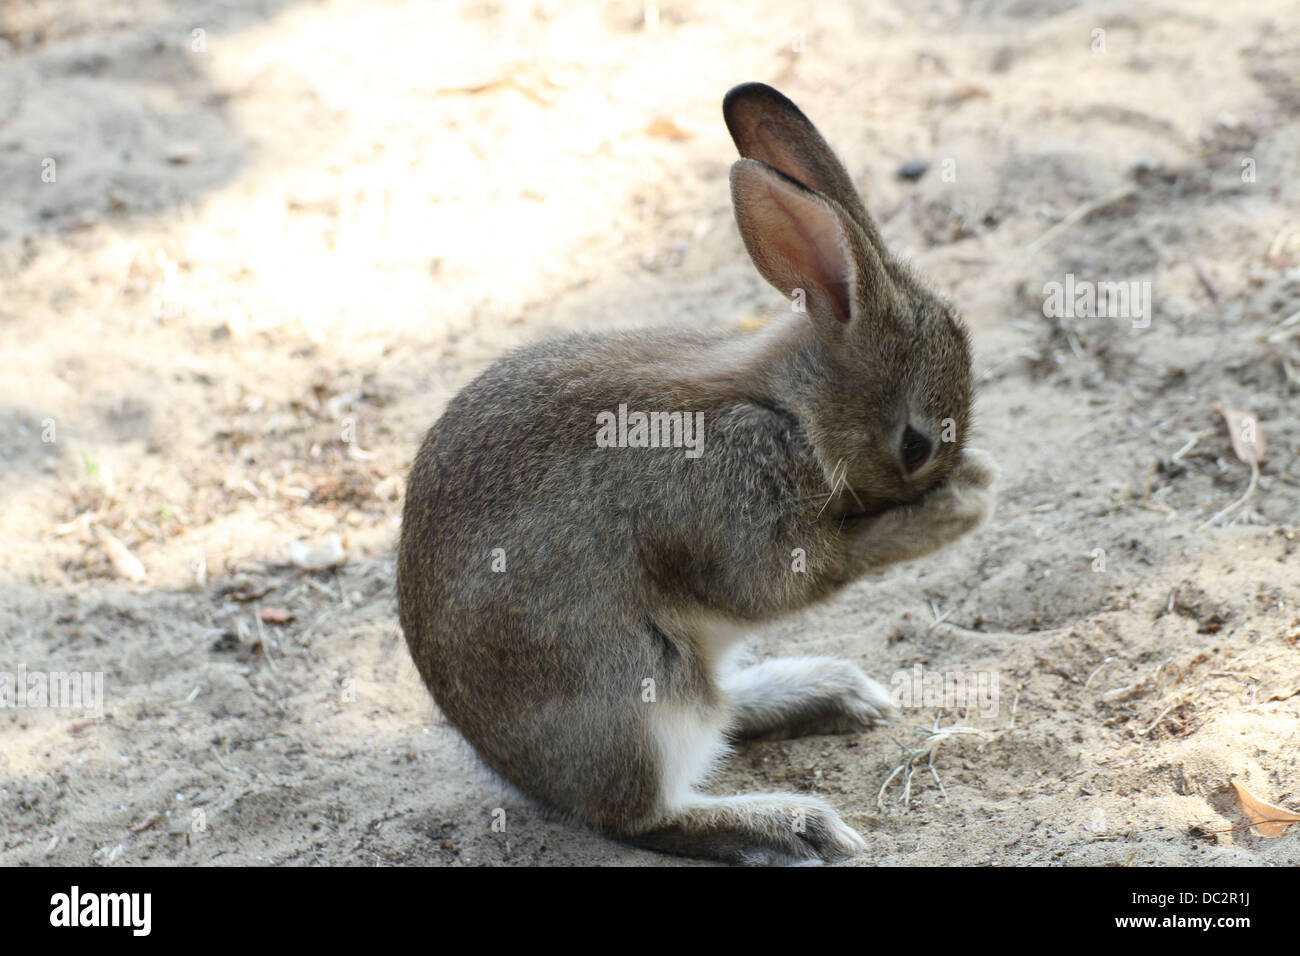 rabbit with very long ears while you clean the muzzle Stock Photo